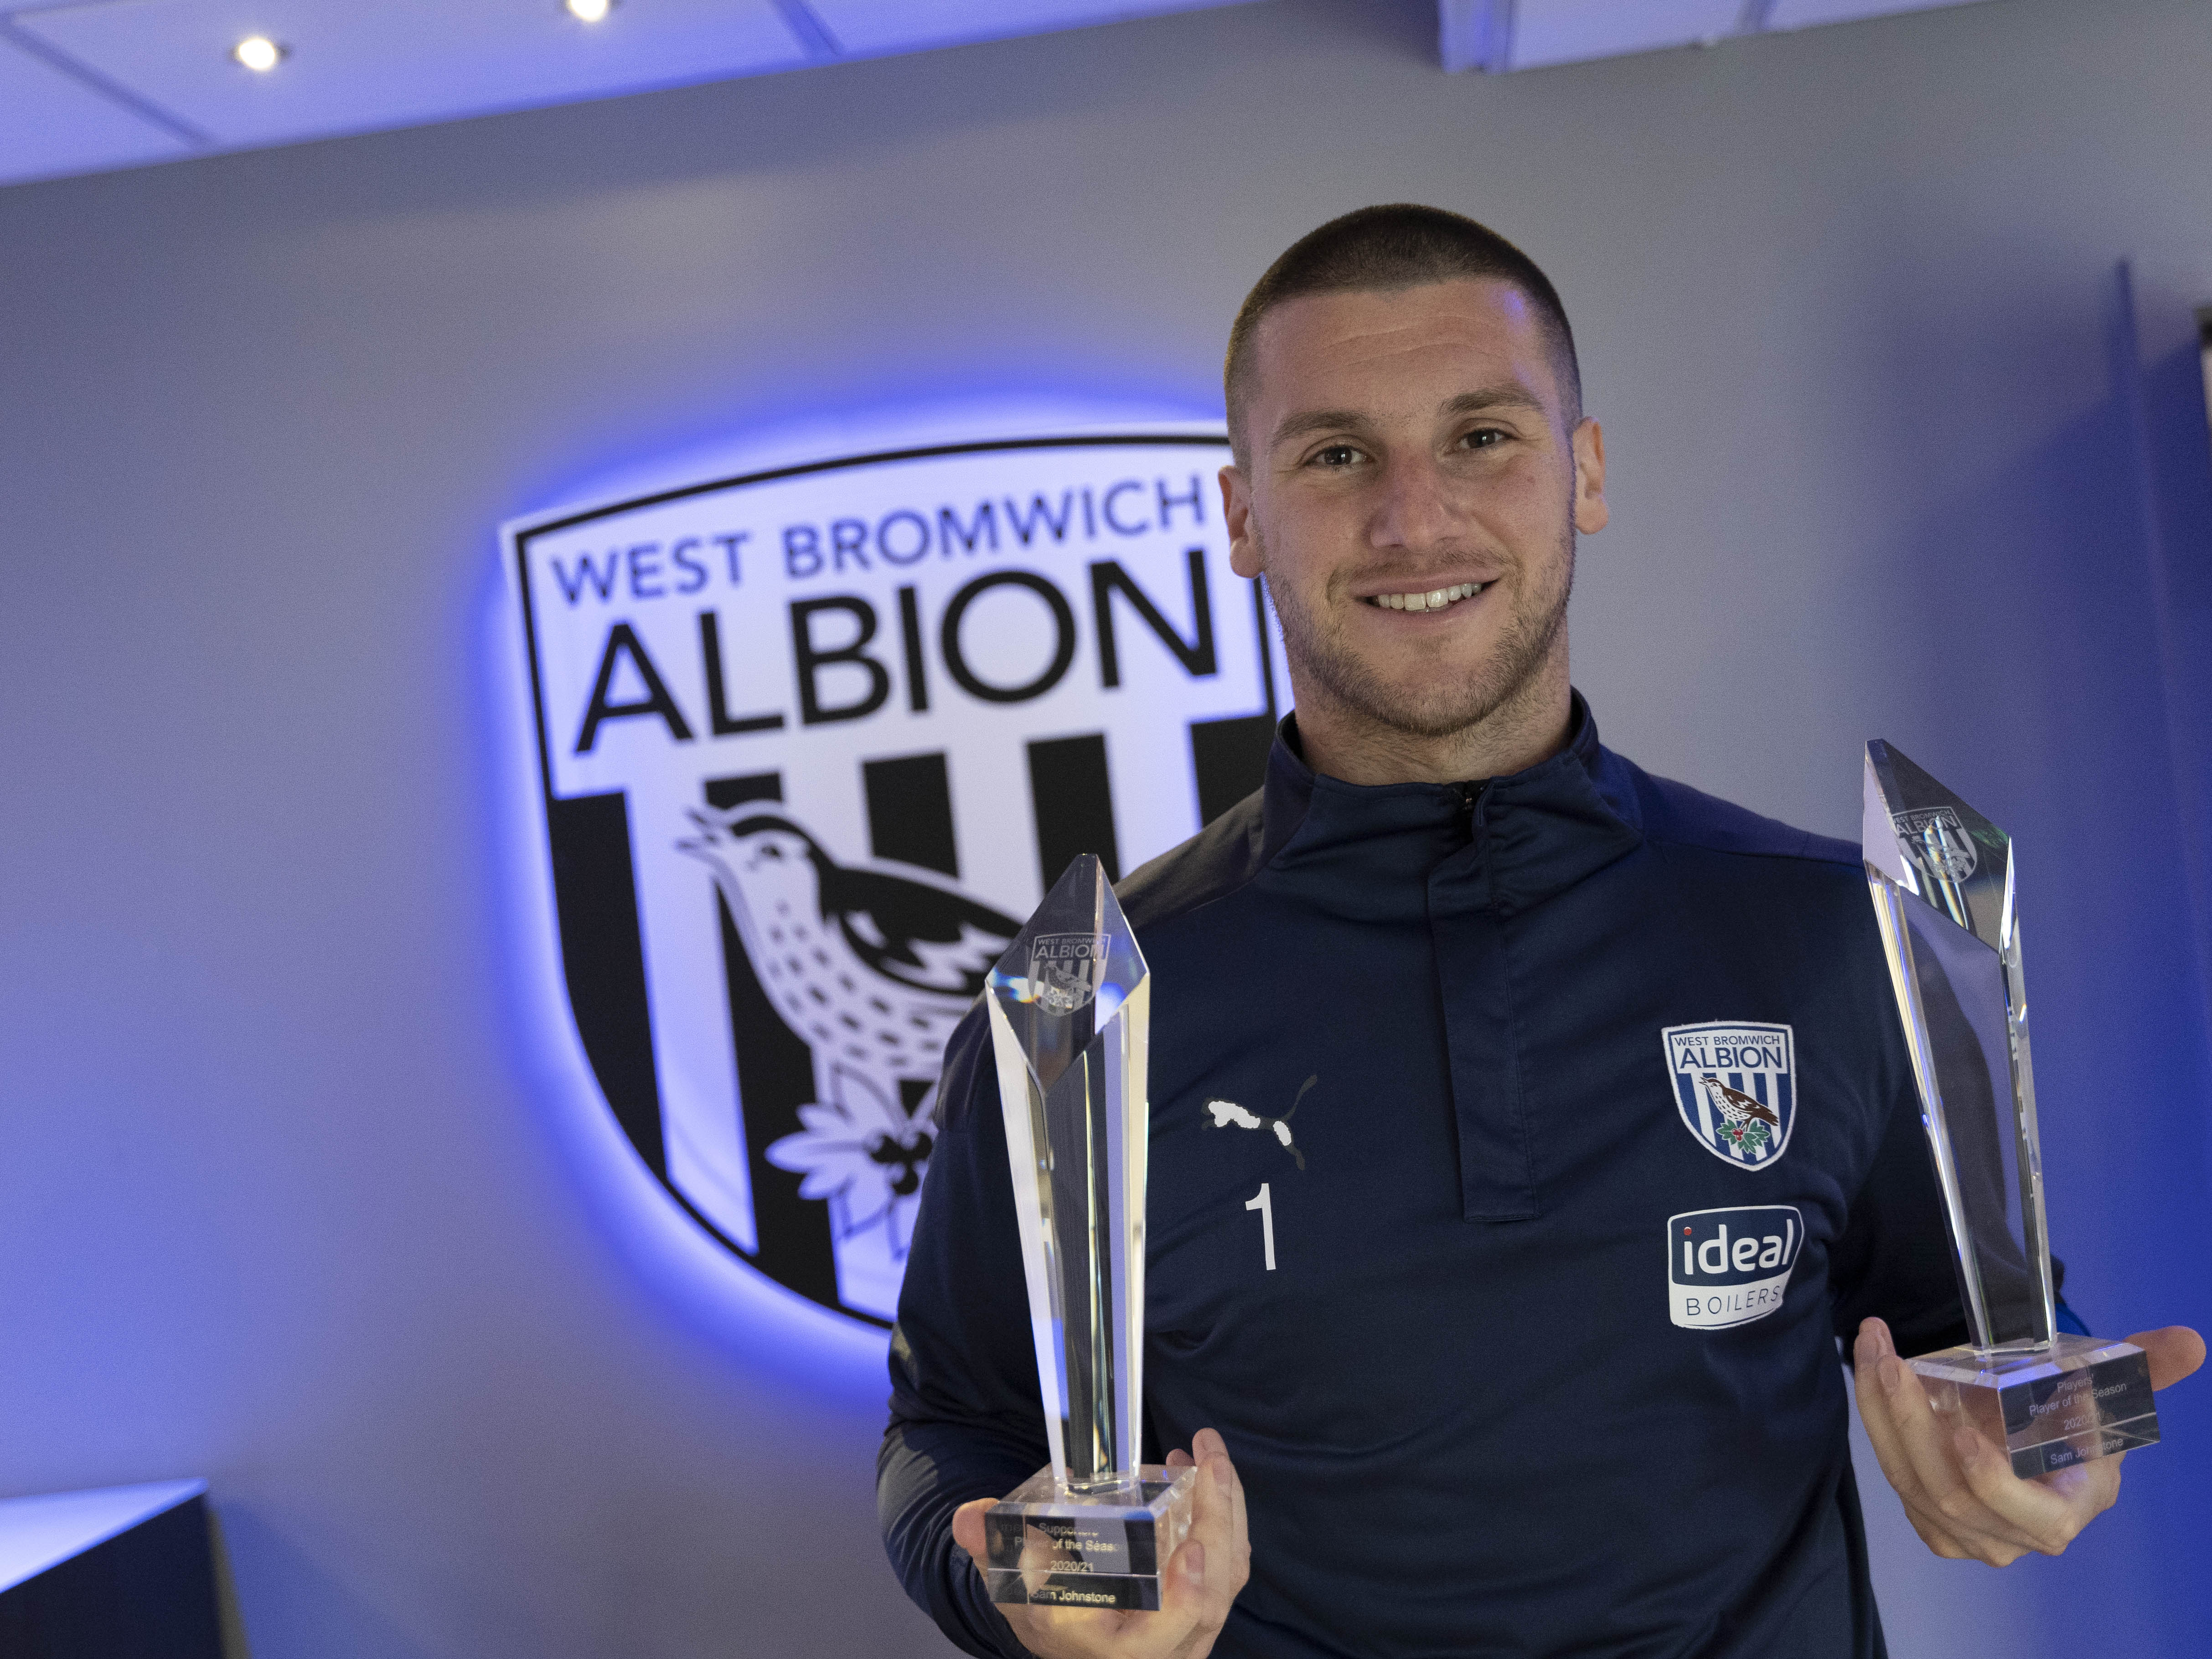 Sam Johnstone has capped off an impressive campaign by picking up a trio of Albion accolades on the day he was included in England’s provisional Euro 2020 squad